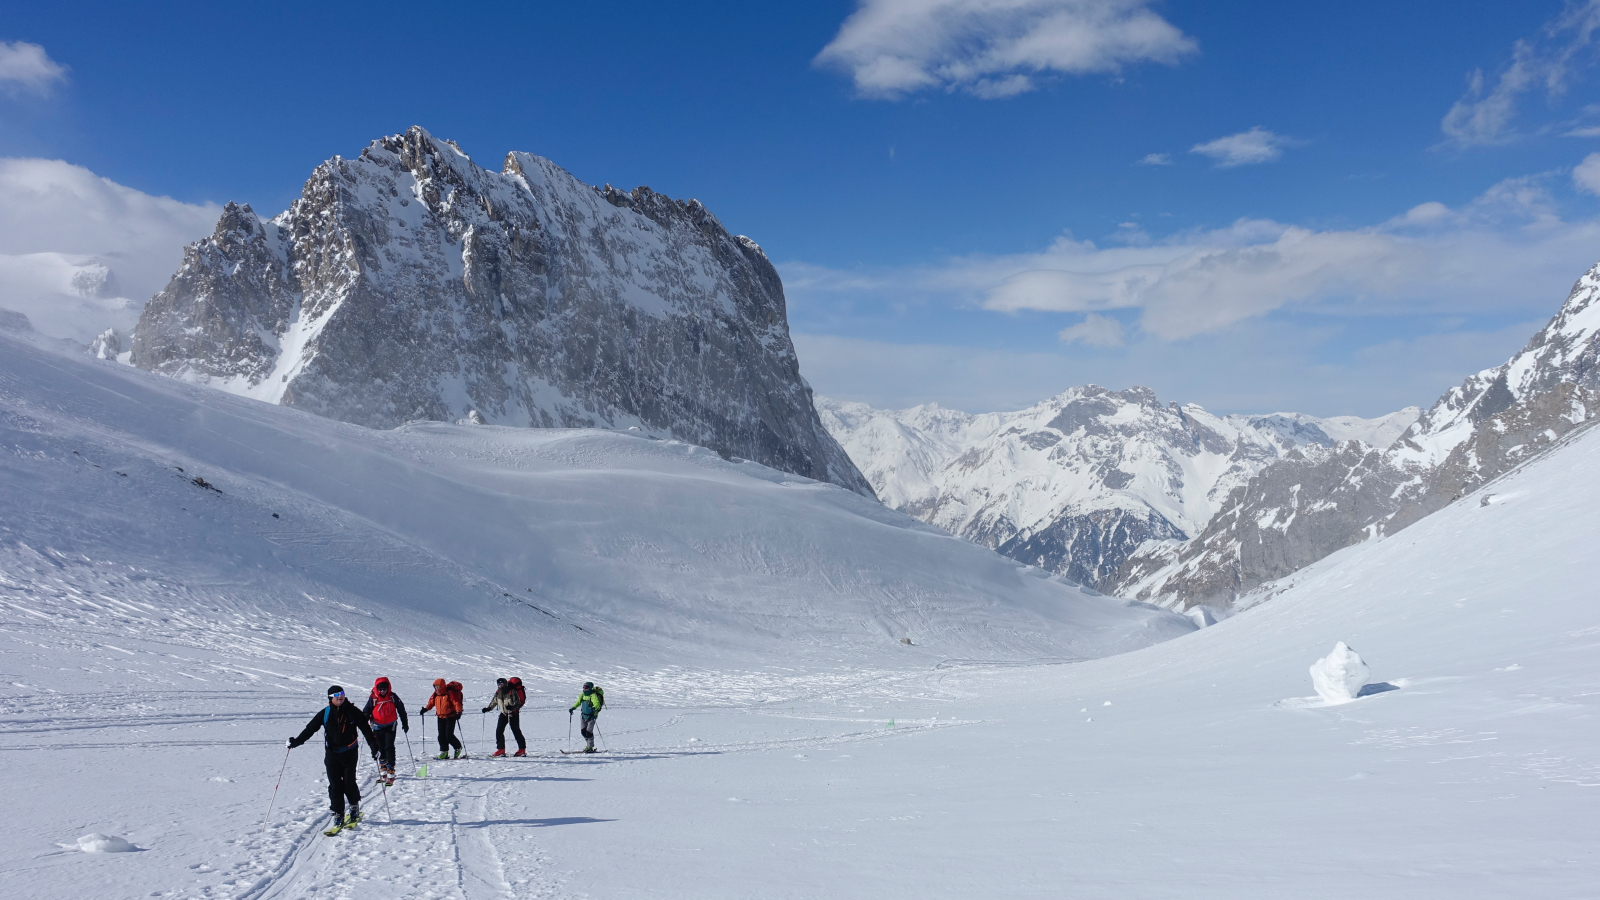 Group of skiers heading to the high peaks